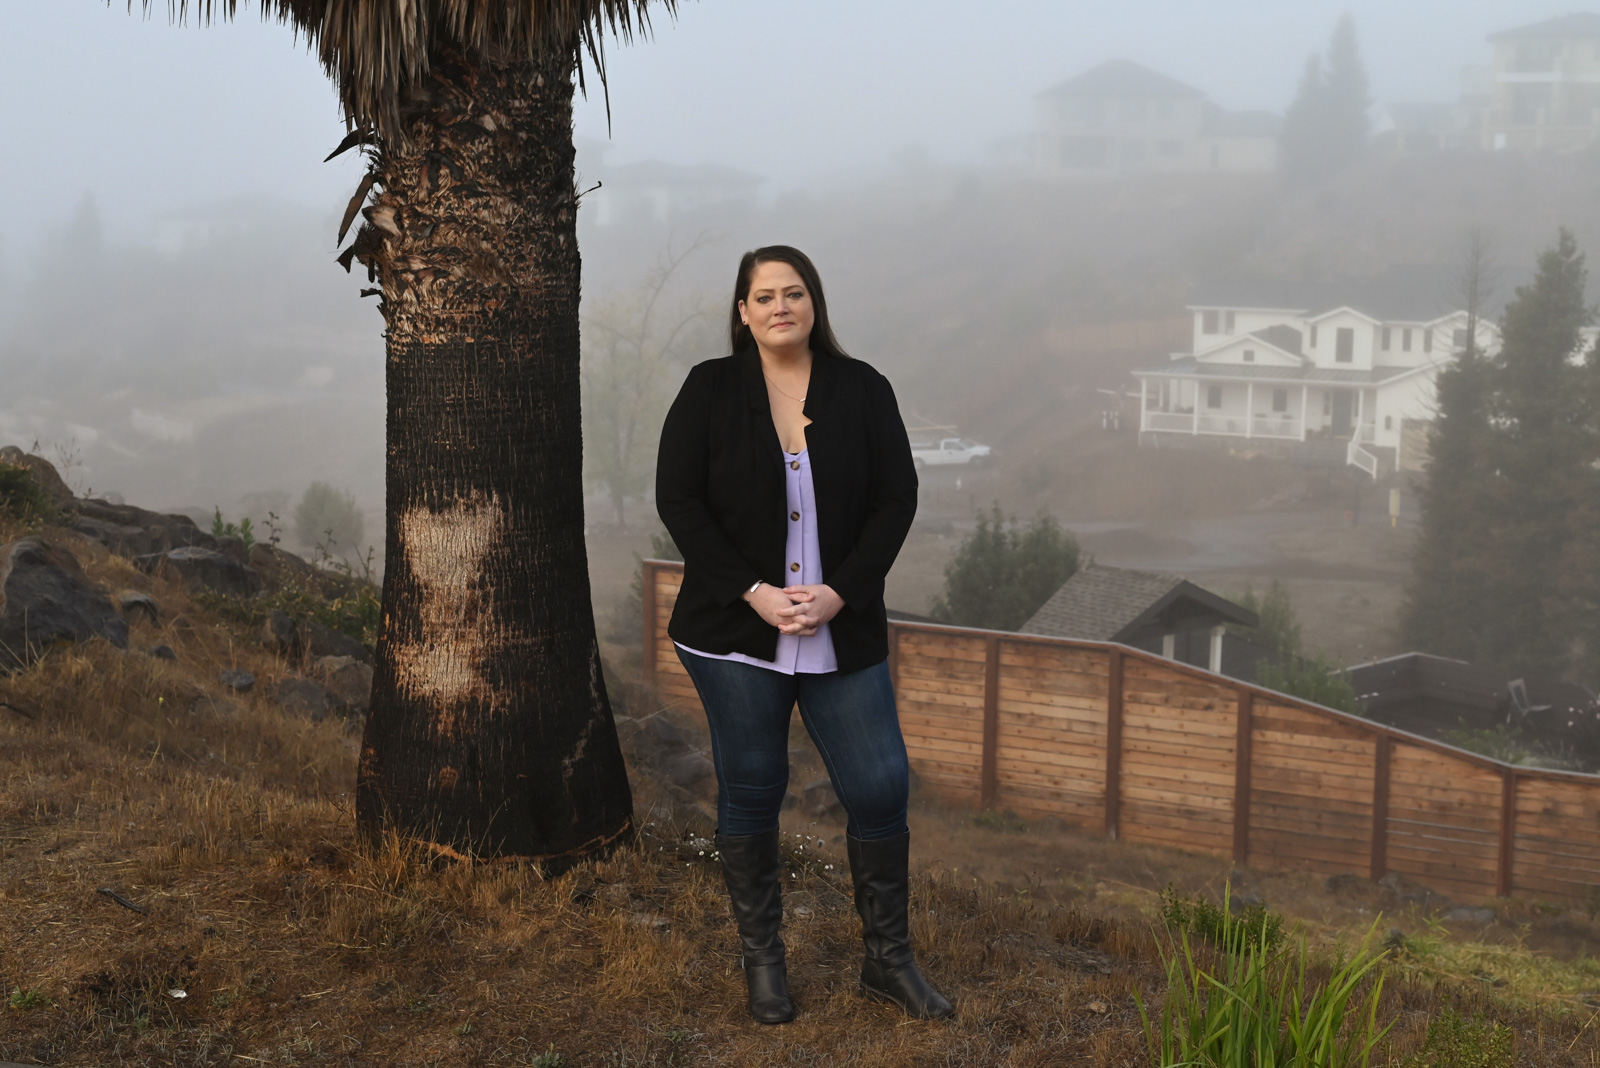 Helping navigate the legal challenges of losing your home in a wildfires: Legal Aid of Sonoma County